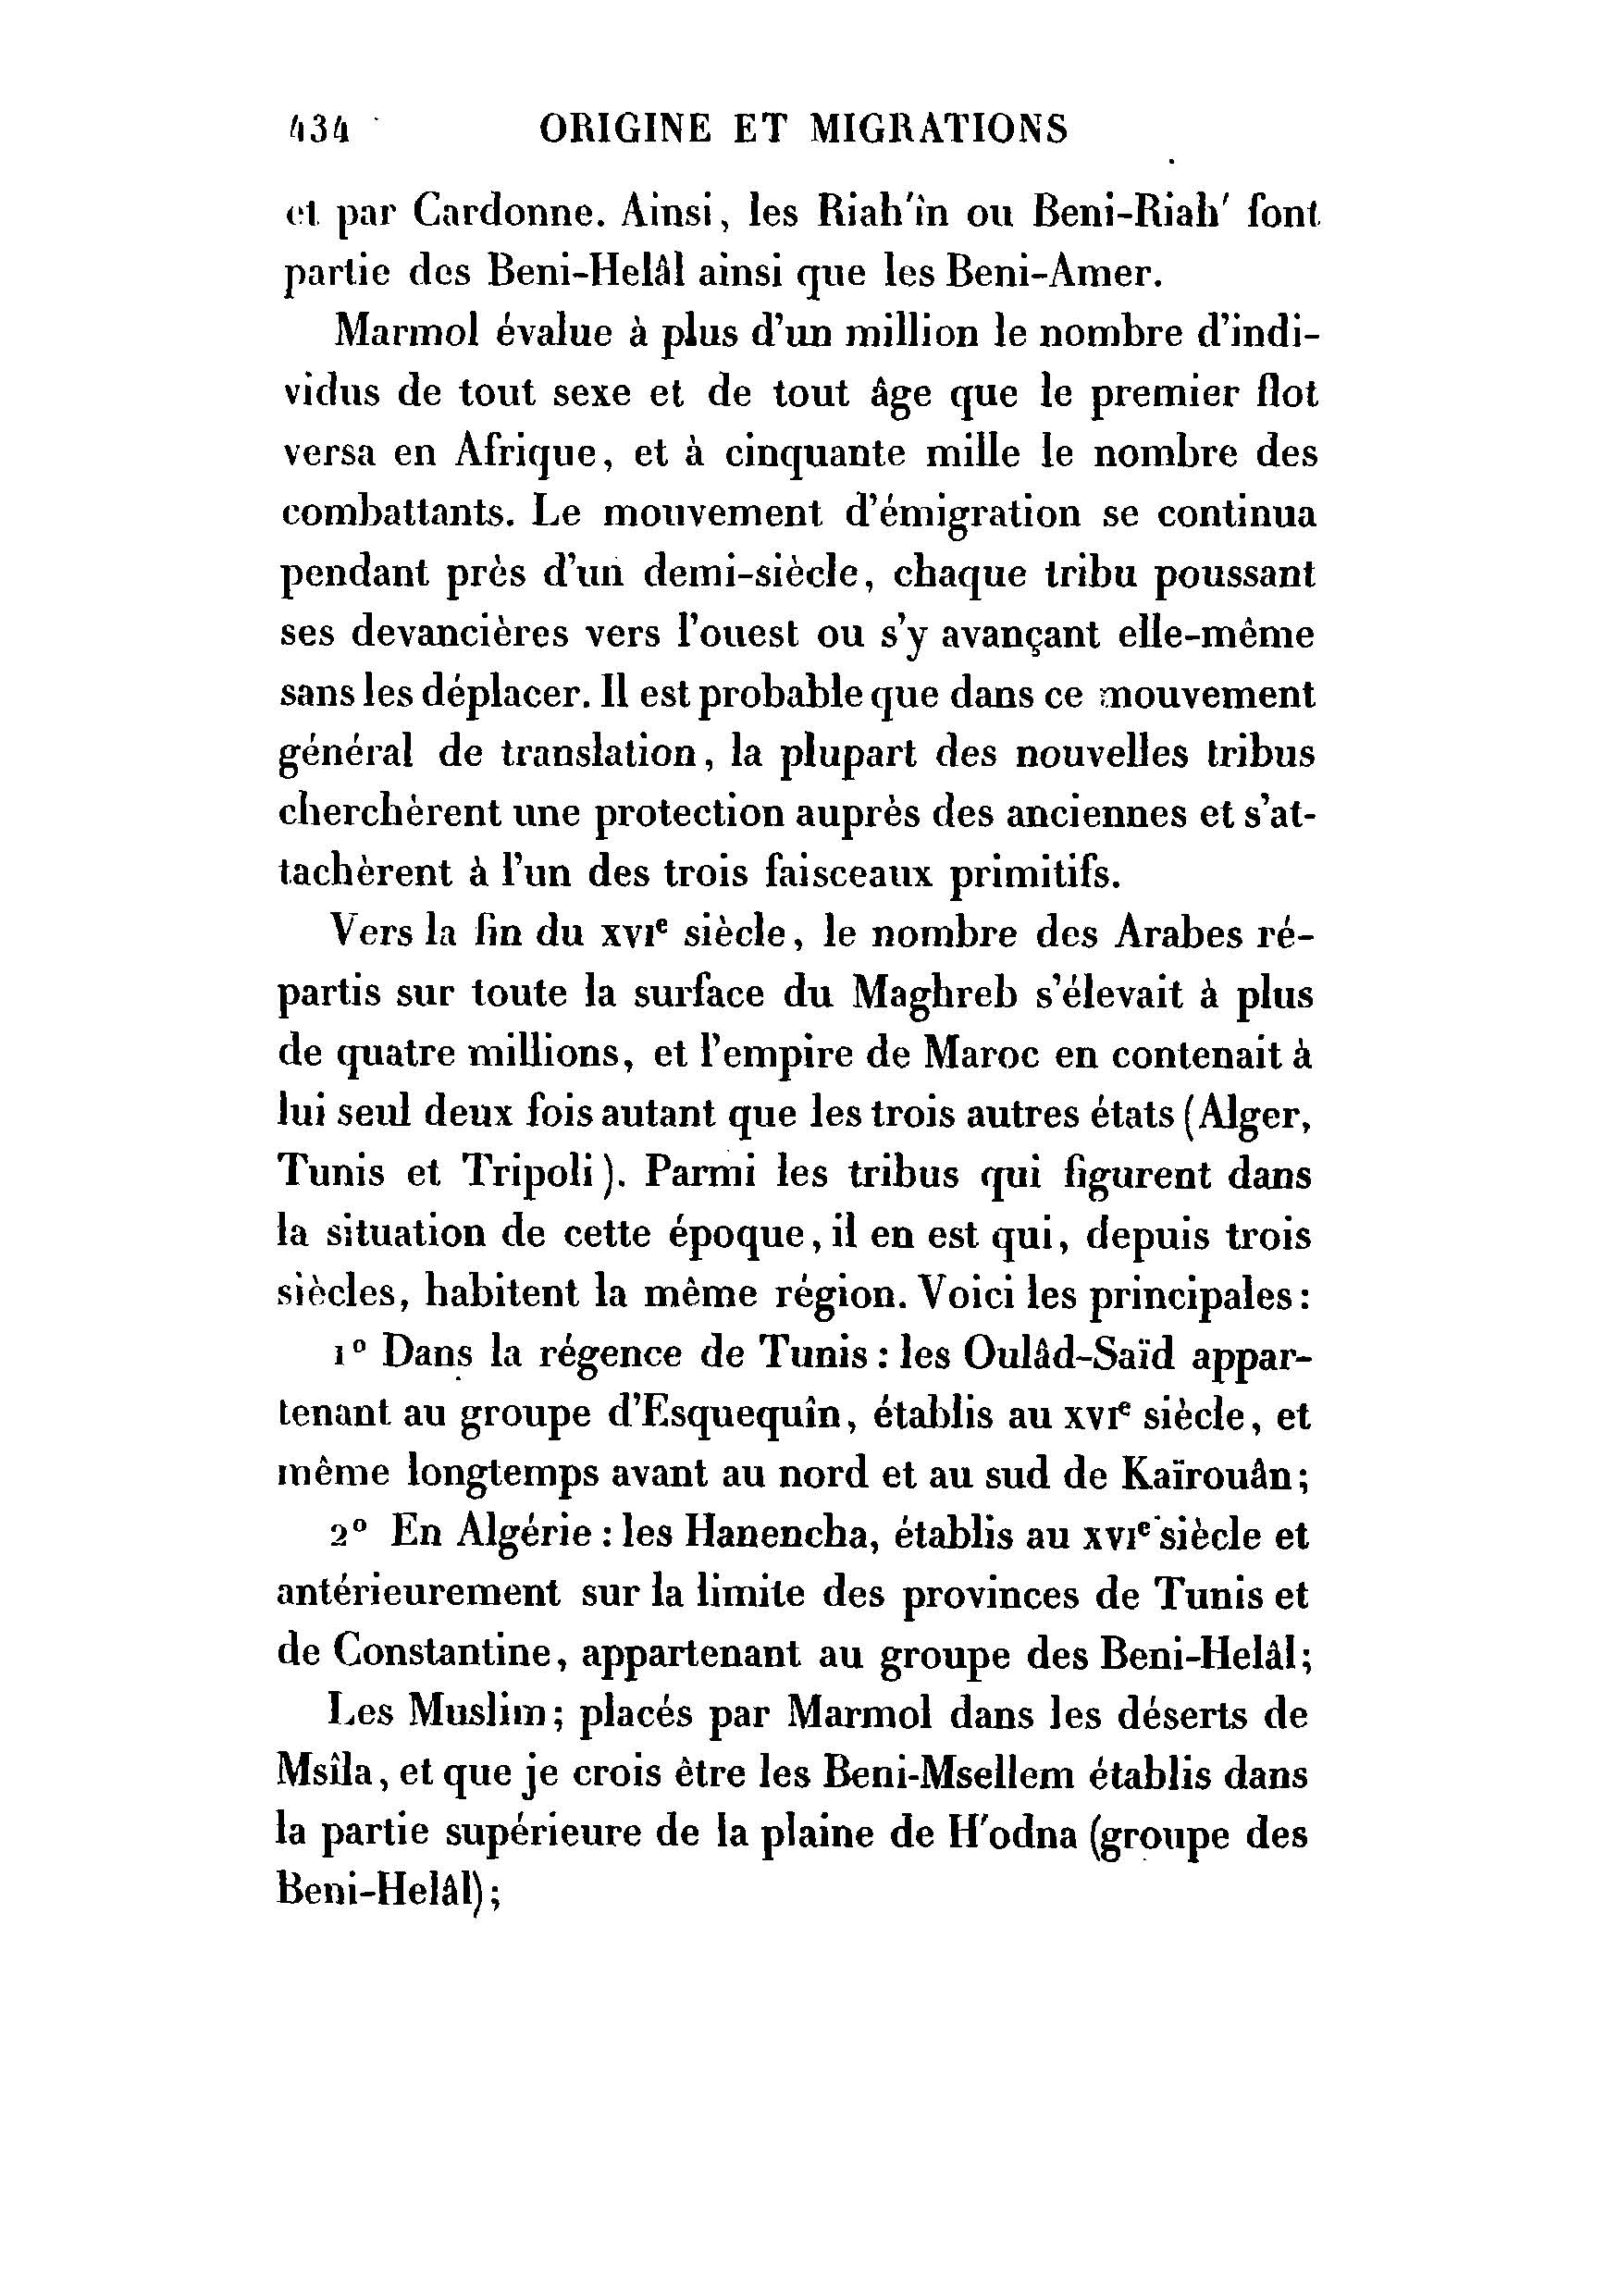 maghreb-tribus-arabes-au-xi-siecle-443_page_444